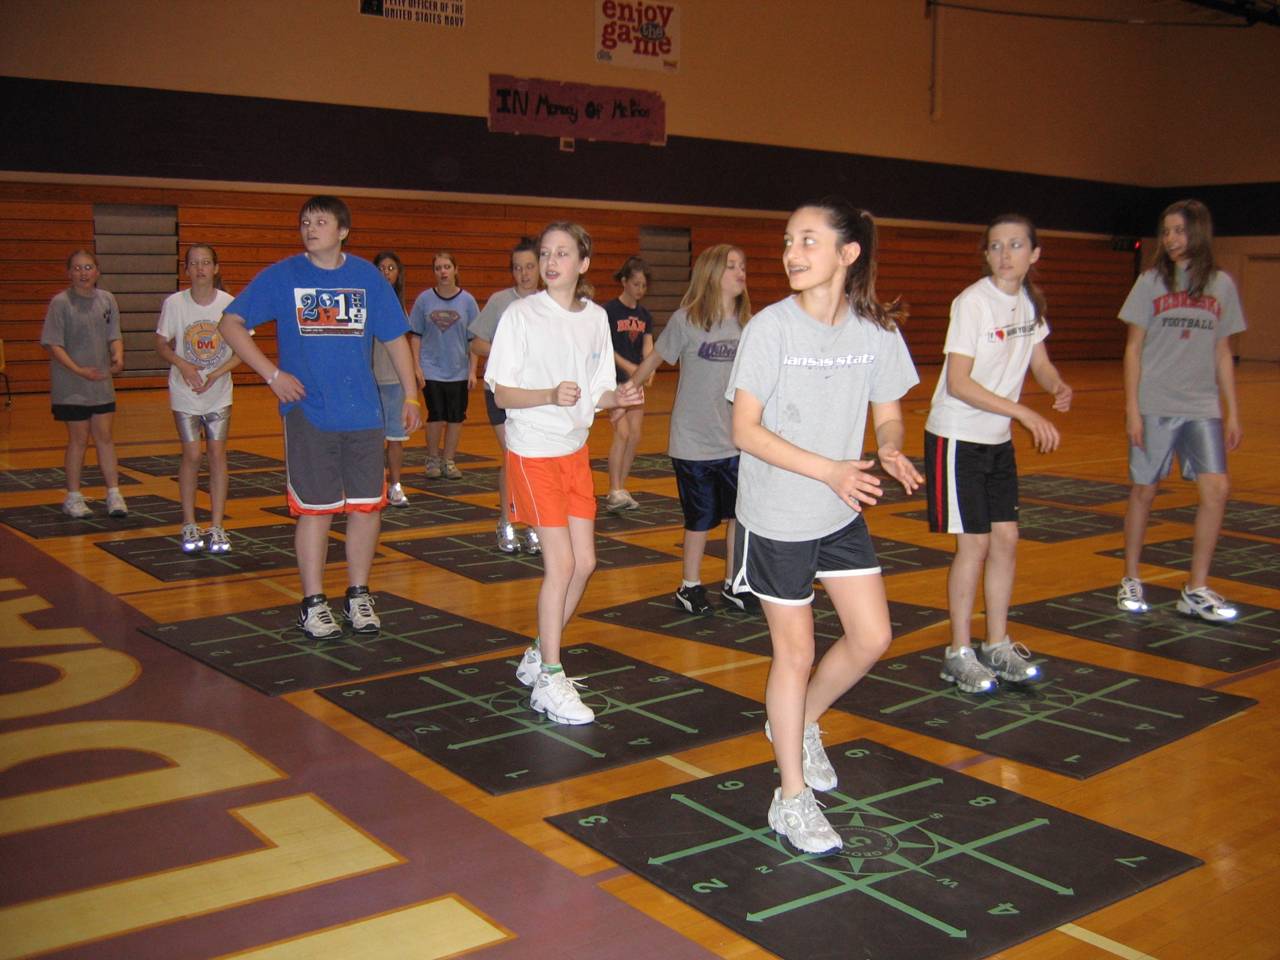 Download this High School Physical Education picture